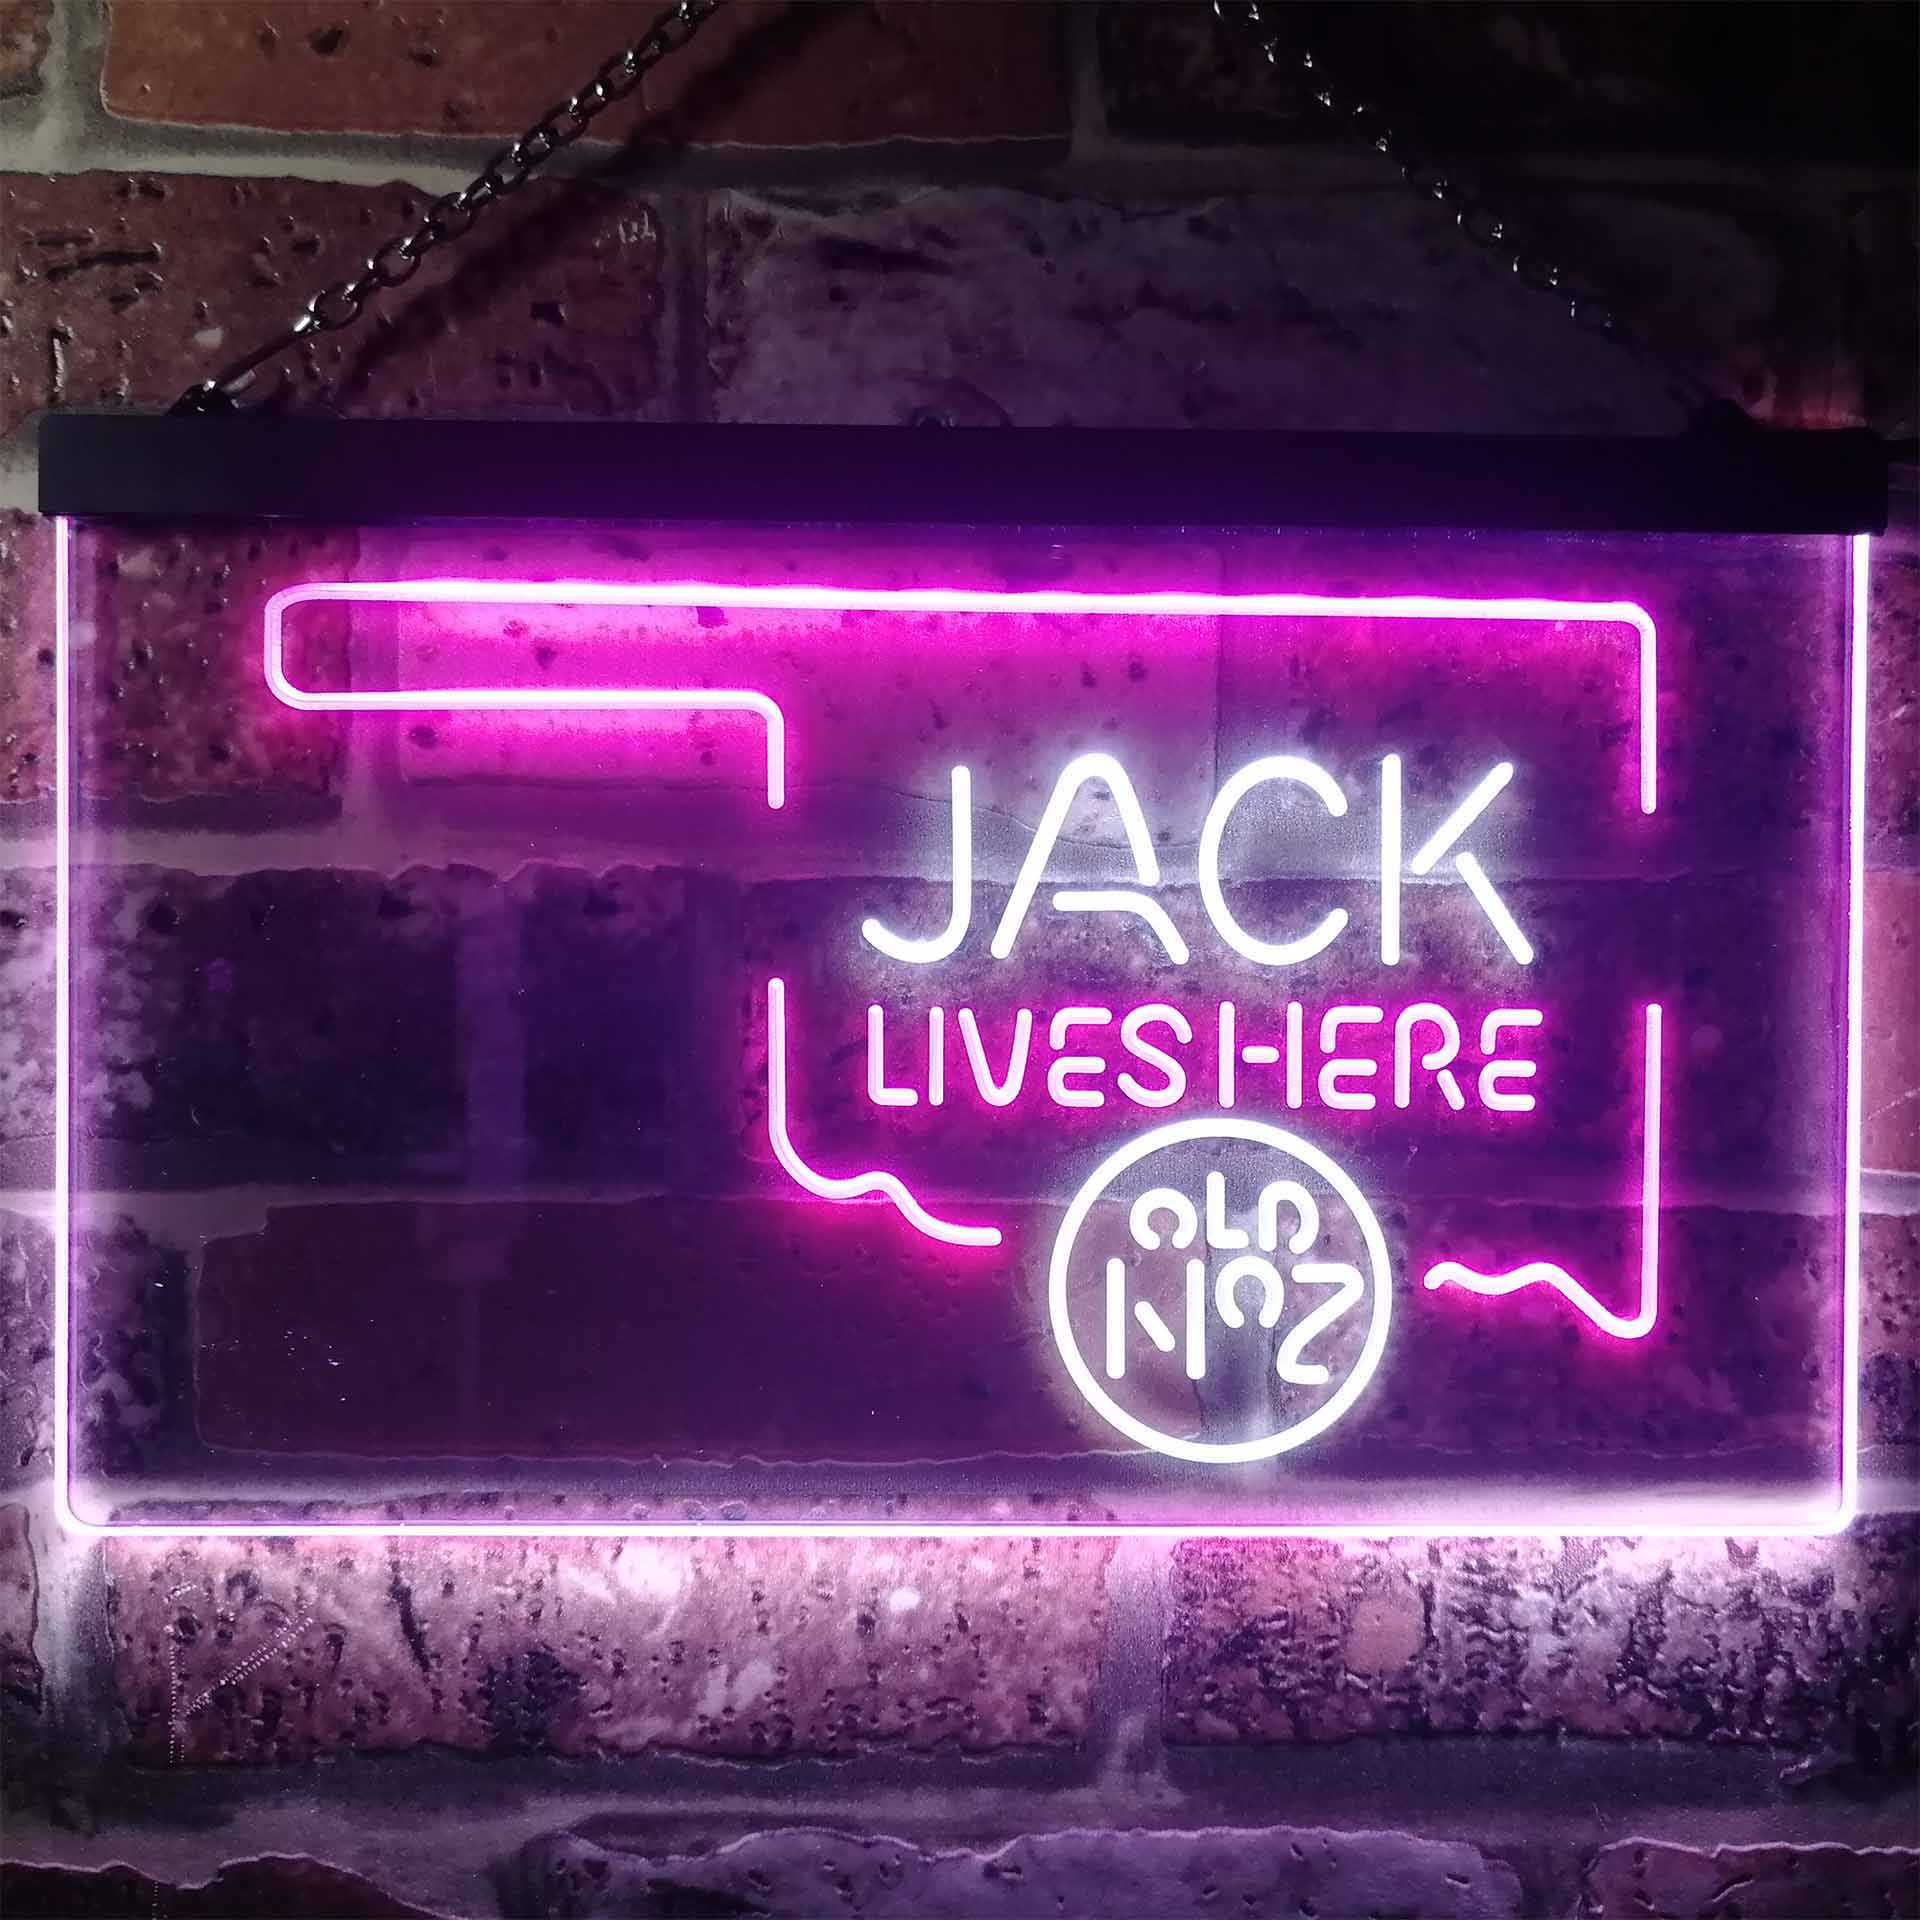 Oklahoma Jack Lives Here Dual Color LED Neon Sign ProLedSign